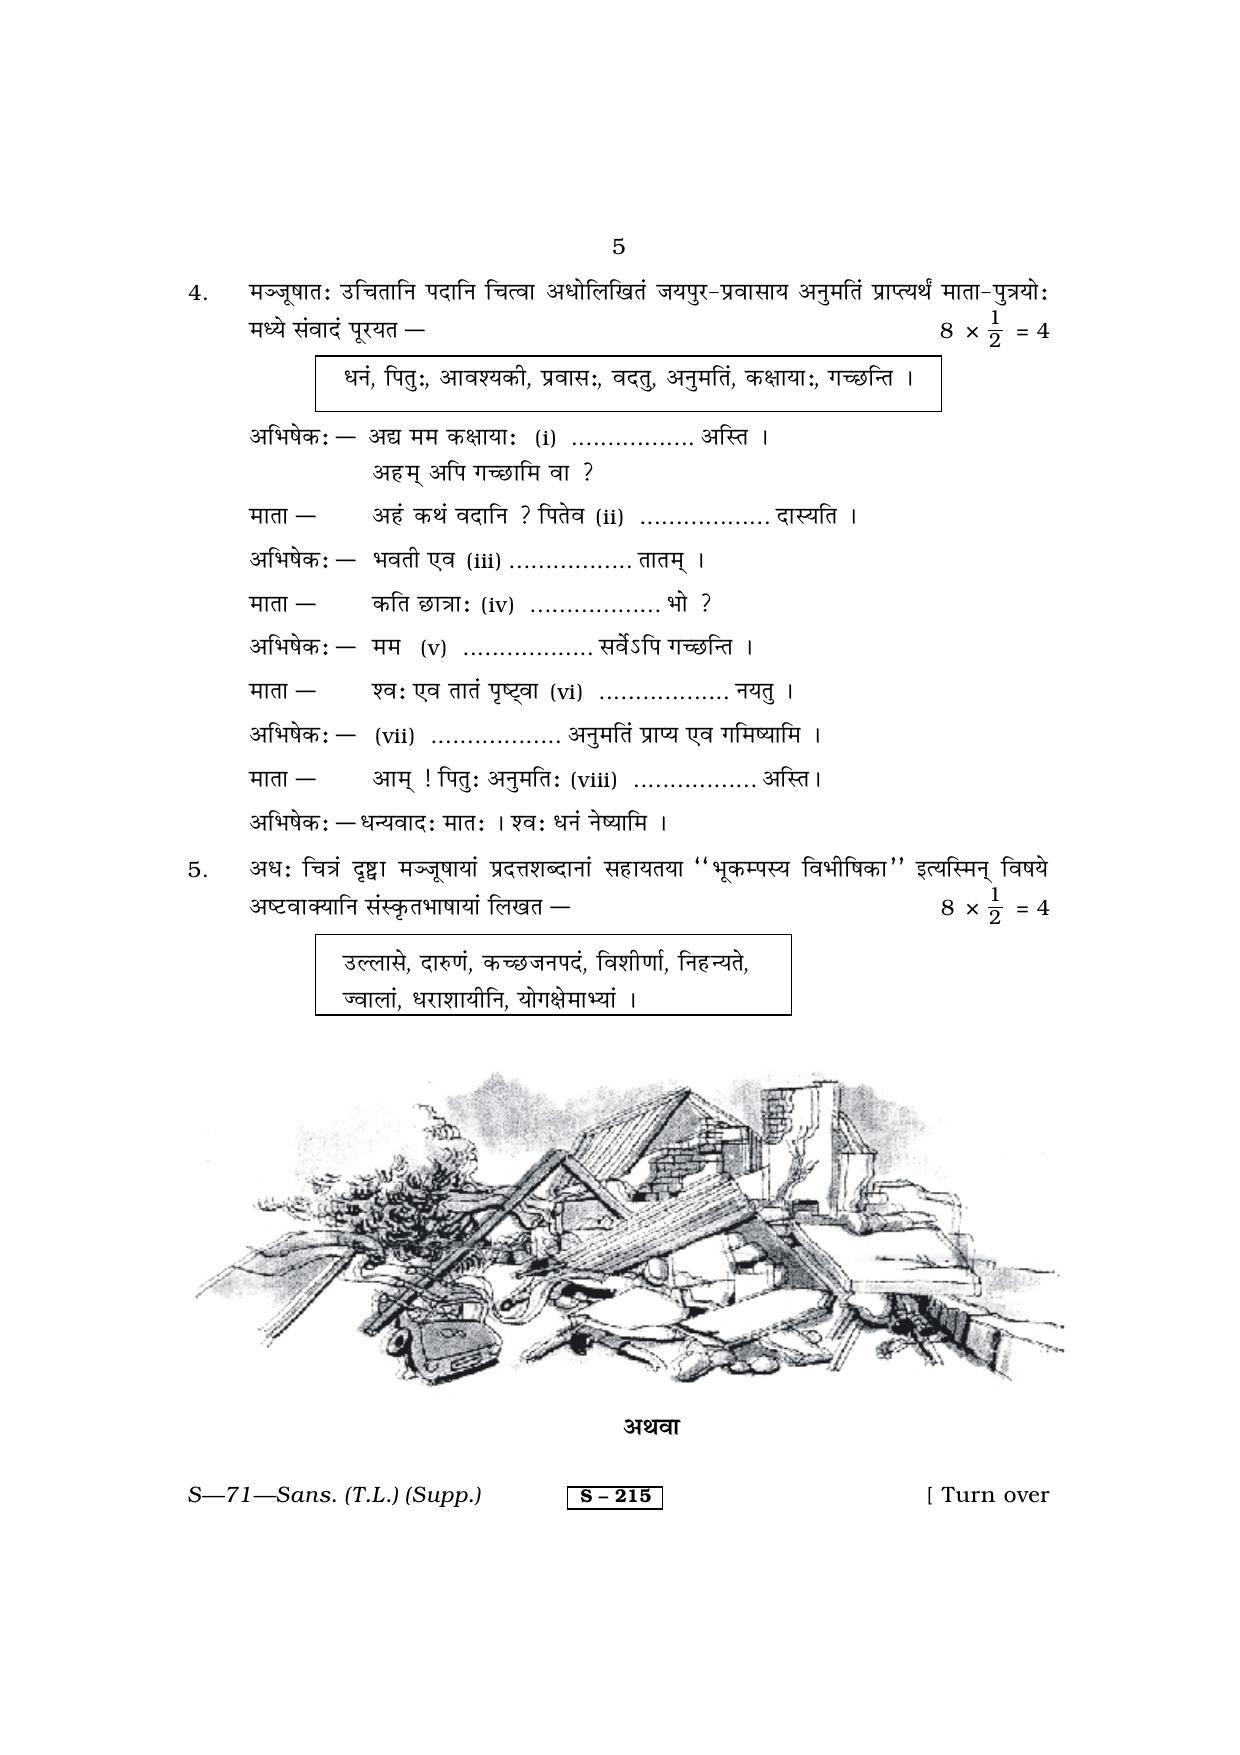 RBSE Class 10 Sanskrit (T.L.) Supplementary 2013 Question Paper - Page 5